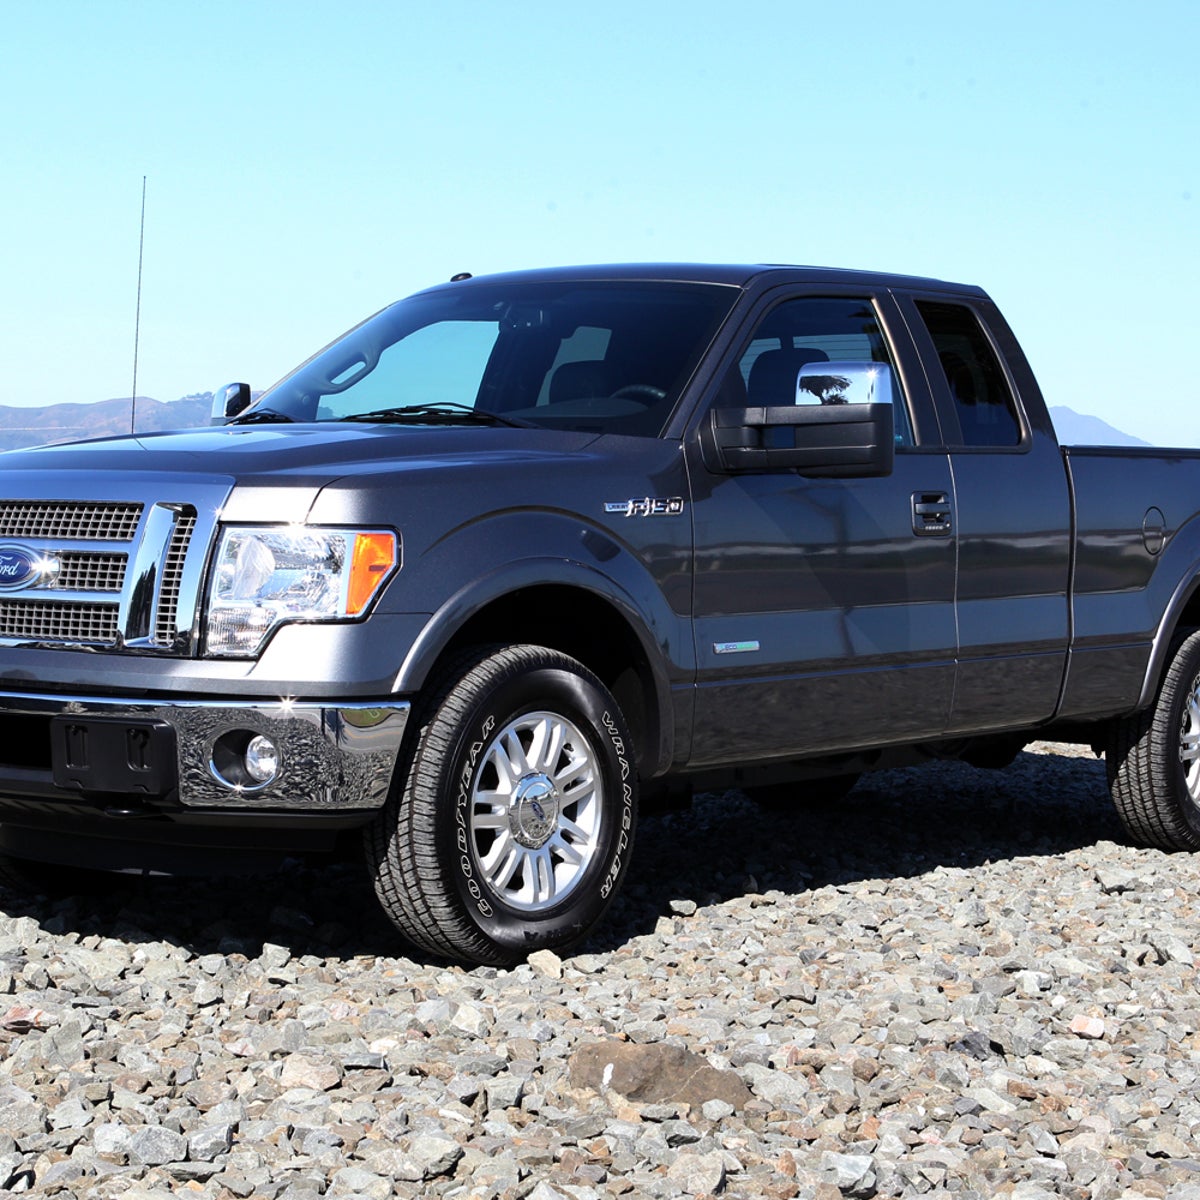 2011 Ford F-150 Lariat SuperCab 4x4 review: 2011 Ford F-150 Lariat SuperCab  4x4 - CNET